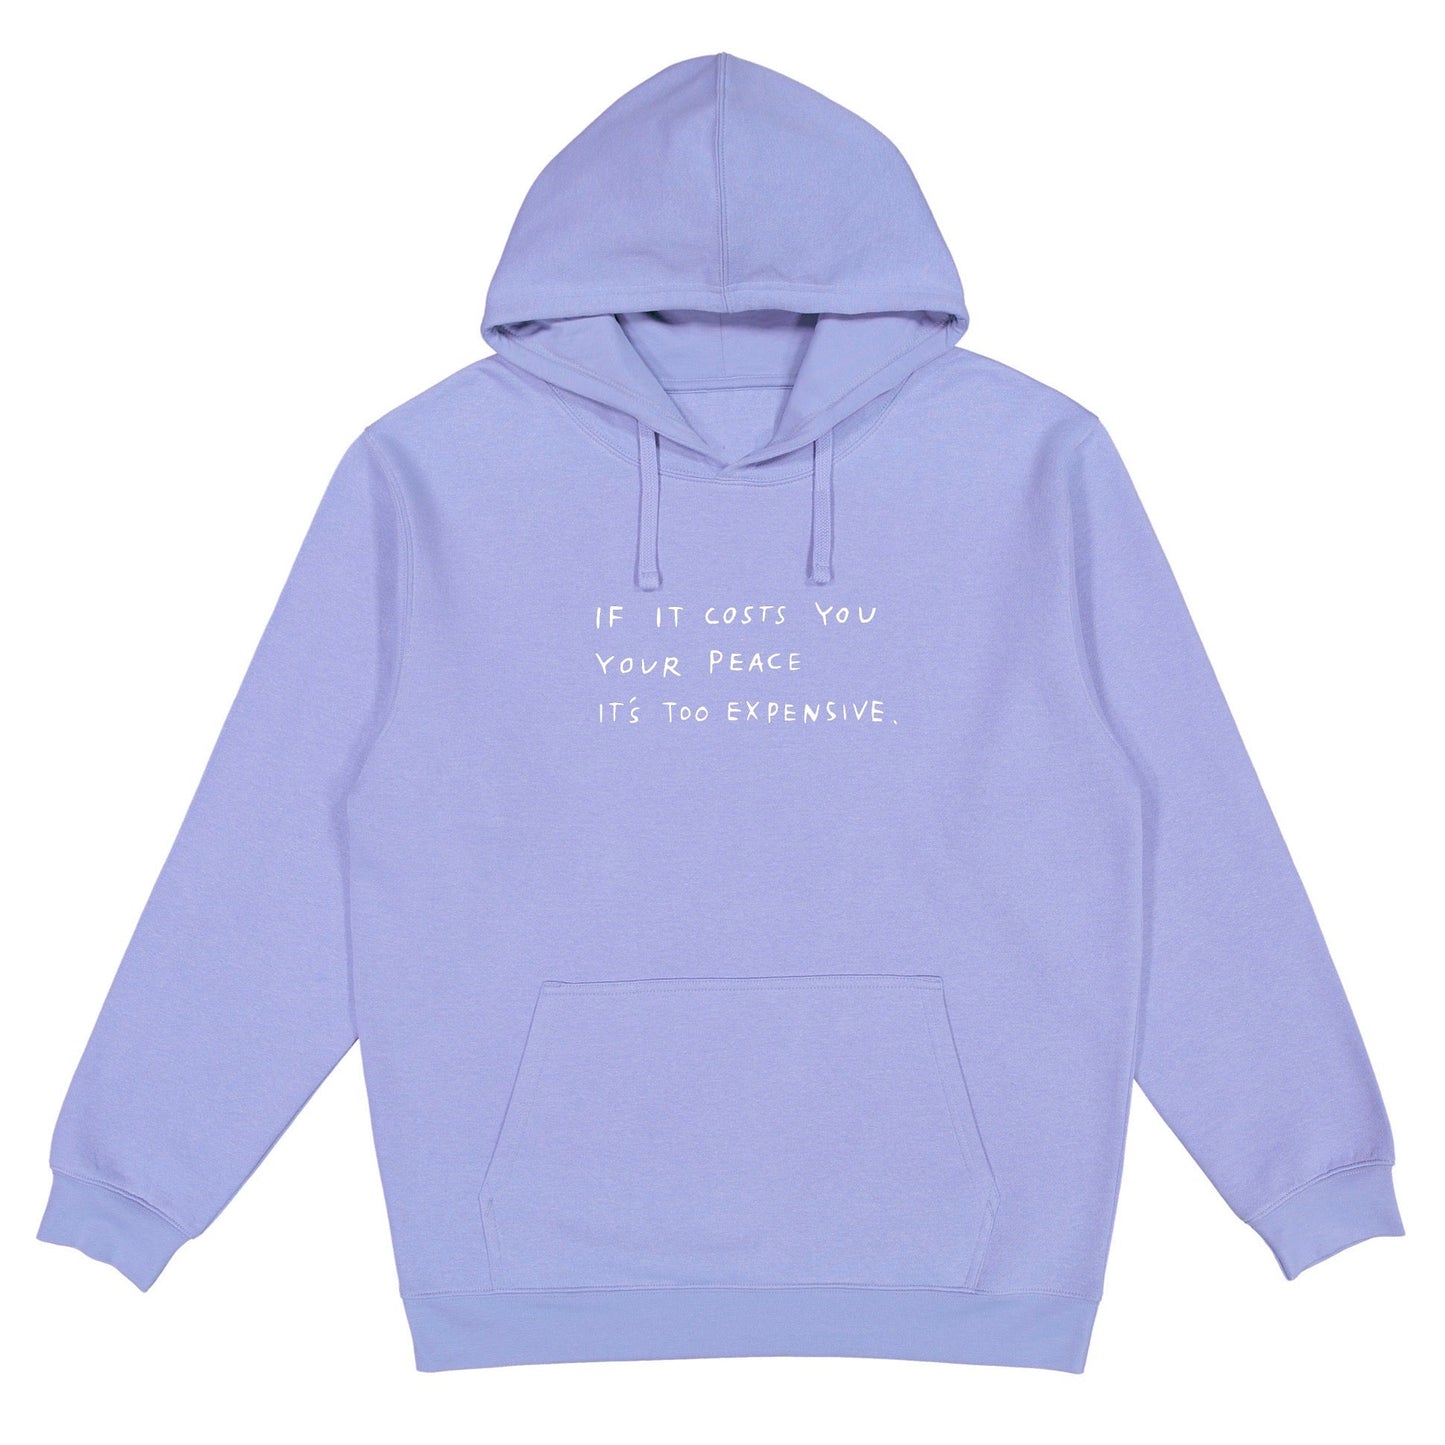 The Cost Of Peace Hoodie + Free Gratitude Journal Wear The Peace Hoodies Violet M